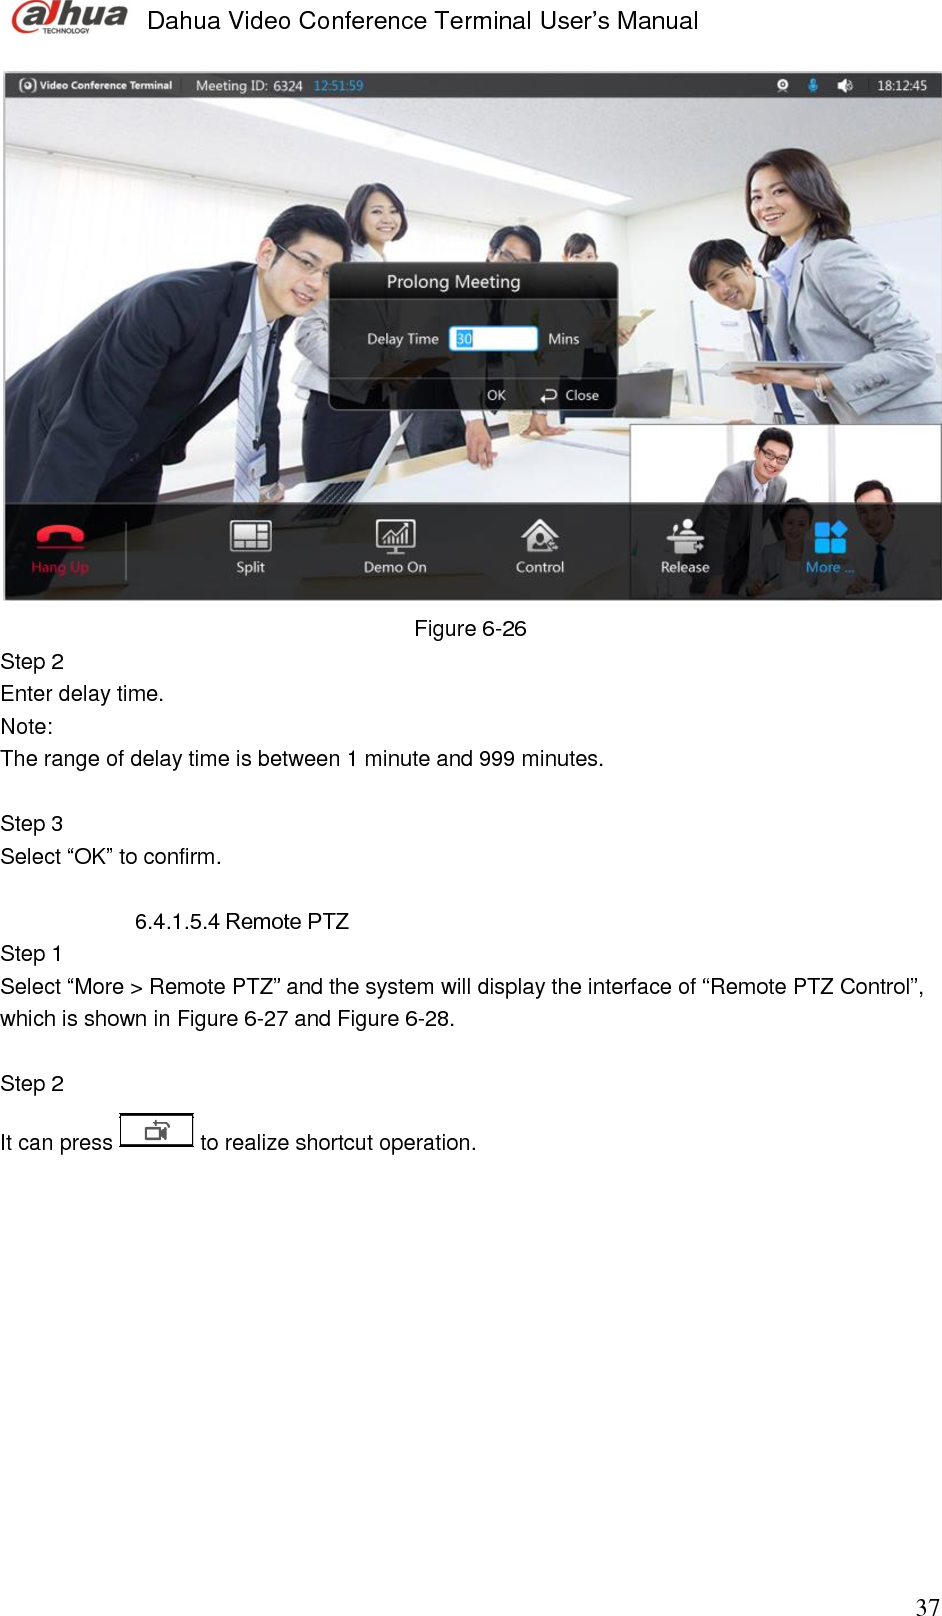  Dahua Video Conference Terminal User’s Manual                                                                              37  Figure 6-26 Step 2  Enter delay time.  Note:  The range of delay time is between 1 minute and 999 minutes.  Step 3  Select “OK” to confirm.   6.4.1.5.4 Remote PTZ Step 1  Select “More &gt; Remote PTZ” and the system will display the interface of “Remote PTZ Control”, which is shown in Figure 6-27 and Figure 6-28.  Step 2  It can press   to realize shortcut operation.  